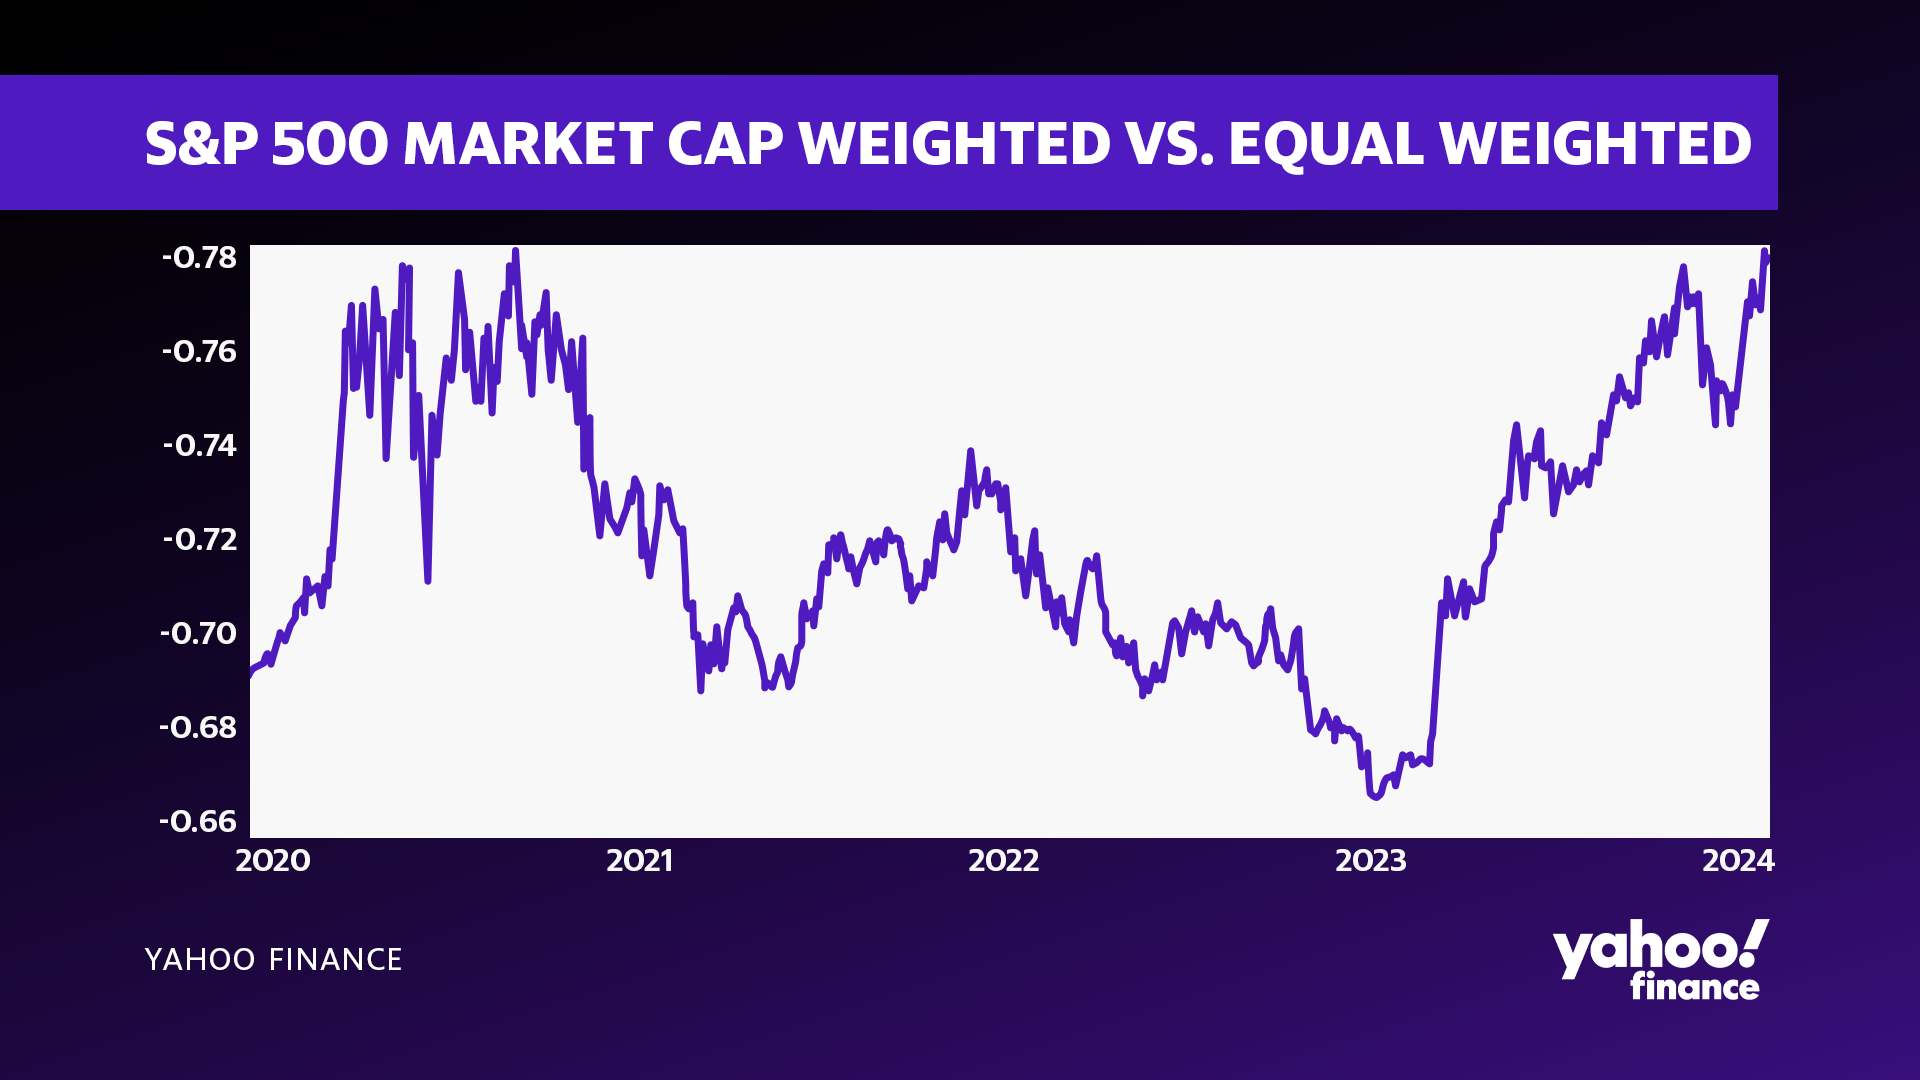 S&P 500 Market Cap Weighted vs. Equal Weighted